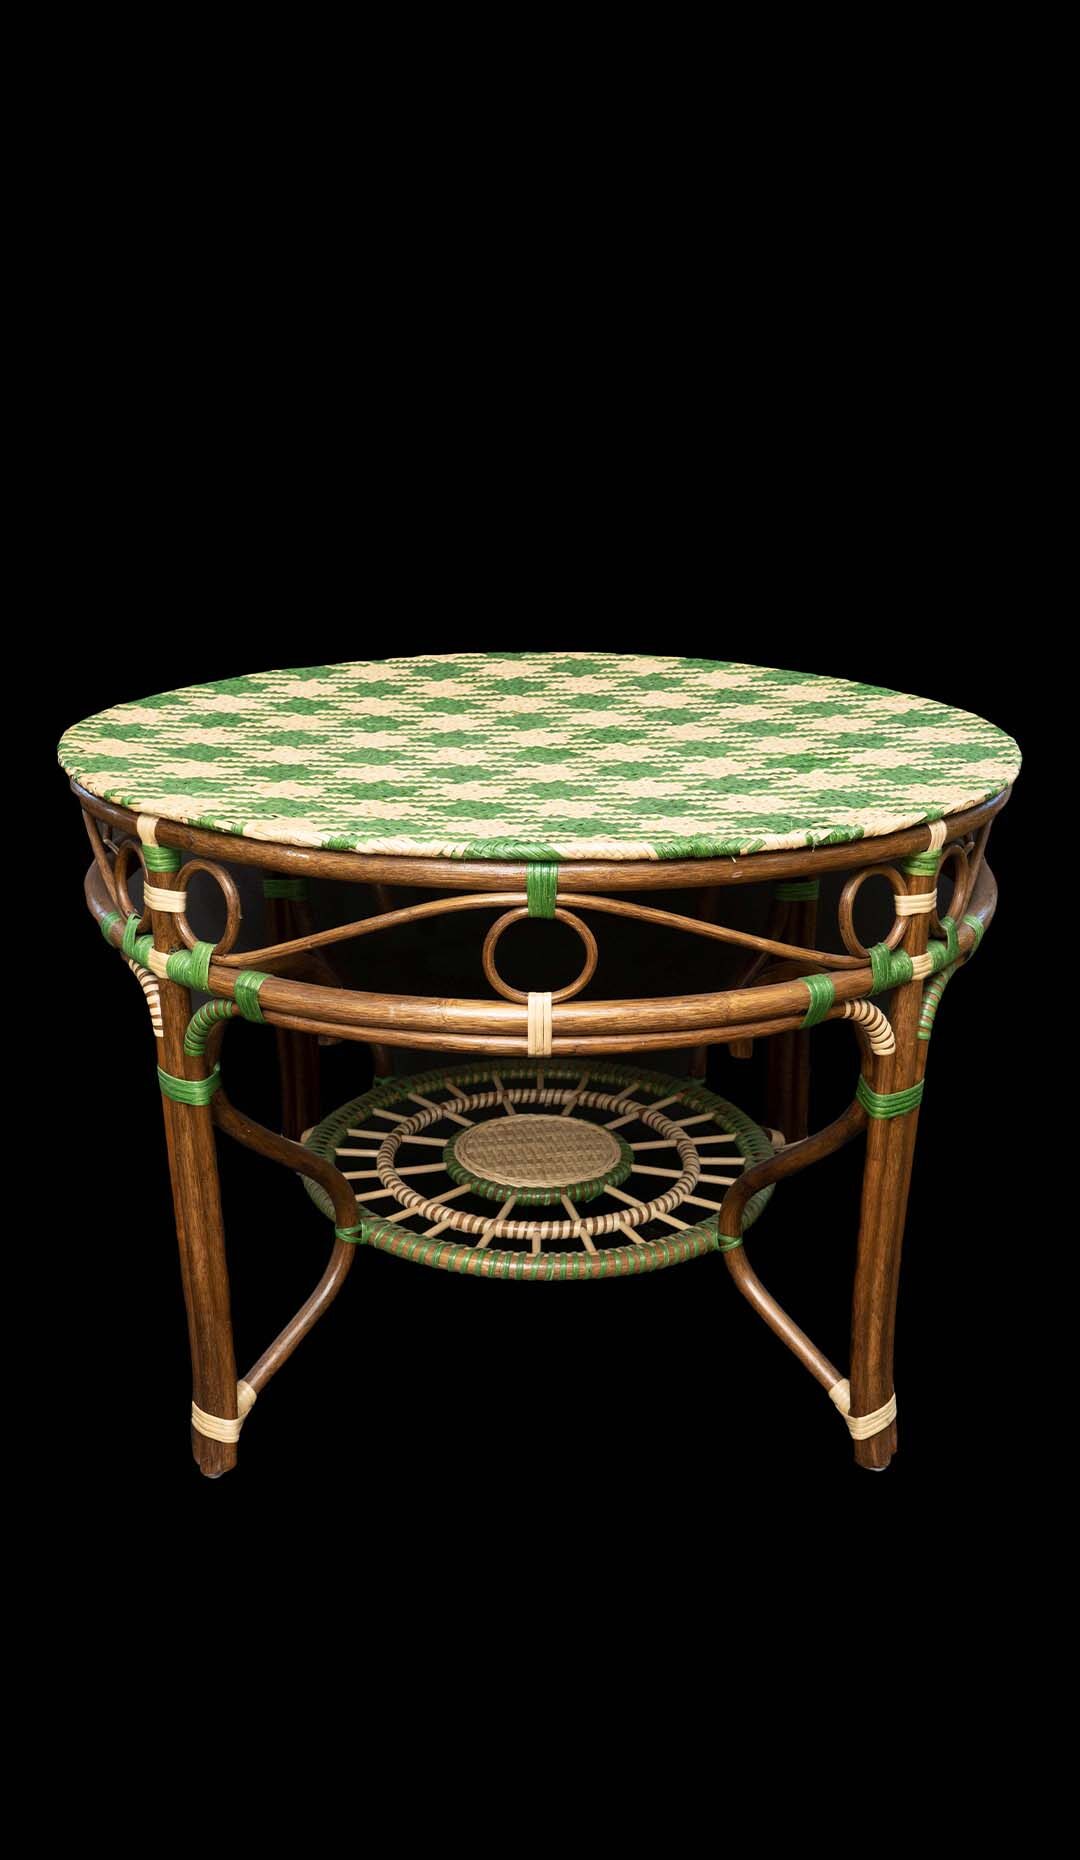 Creel and Gow Green and Cream Rattan Center Table with Hounds Tooth Top Design